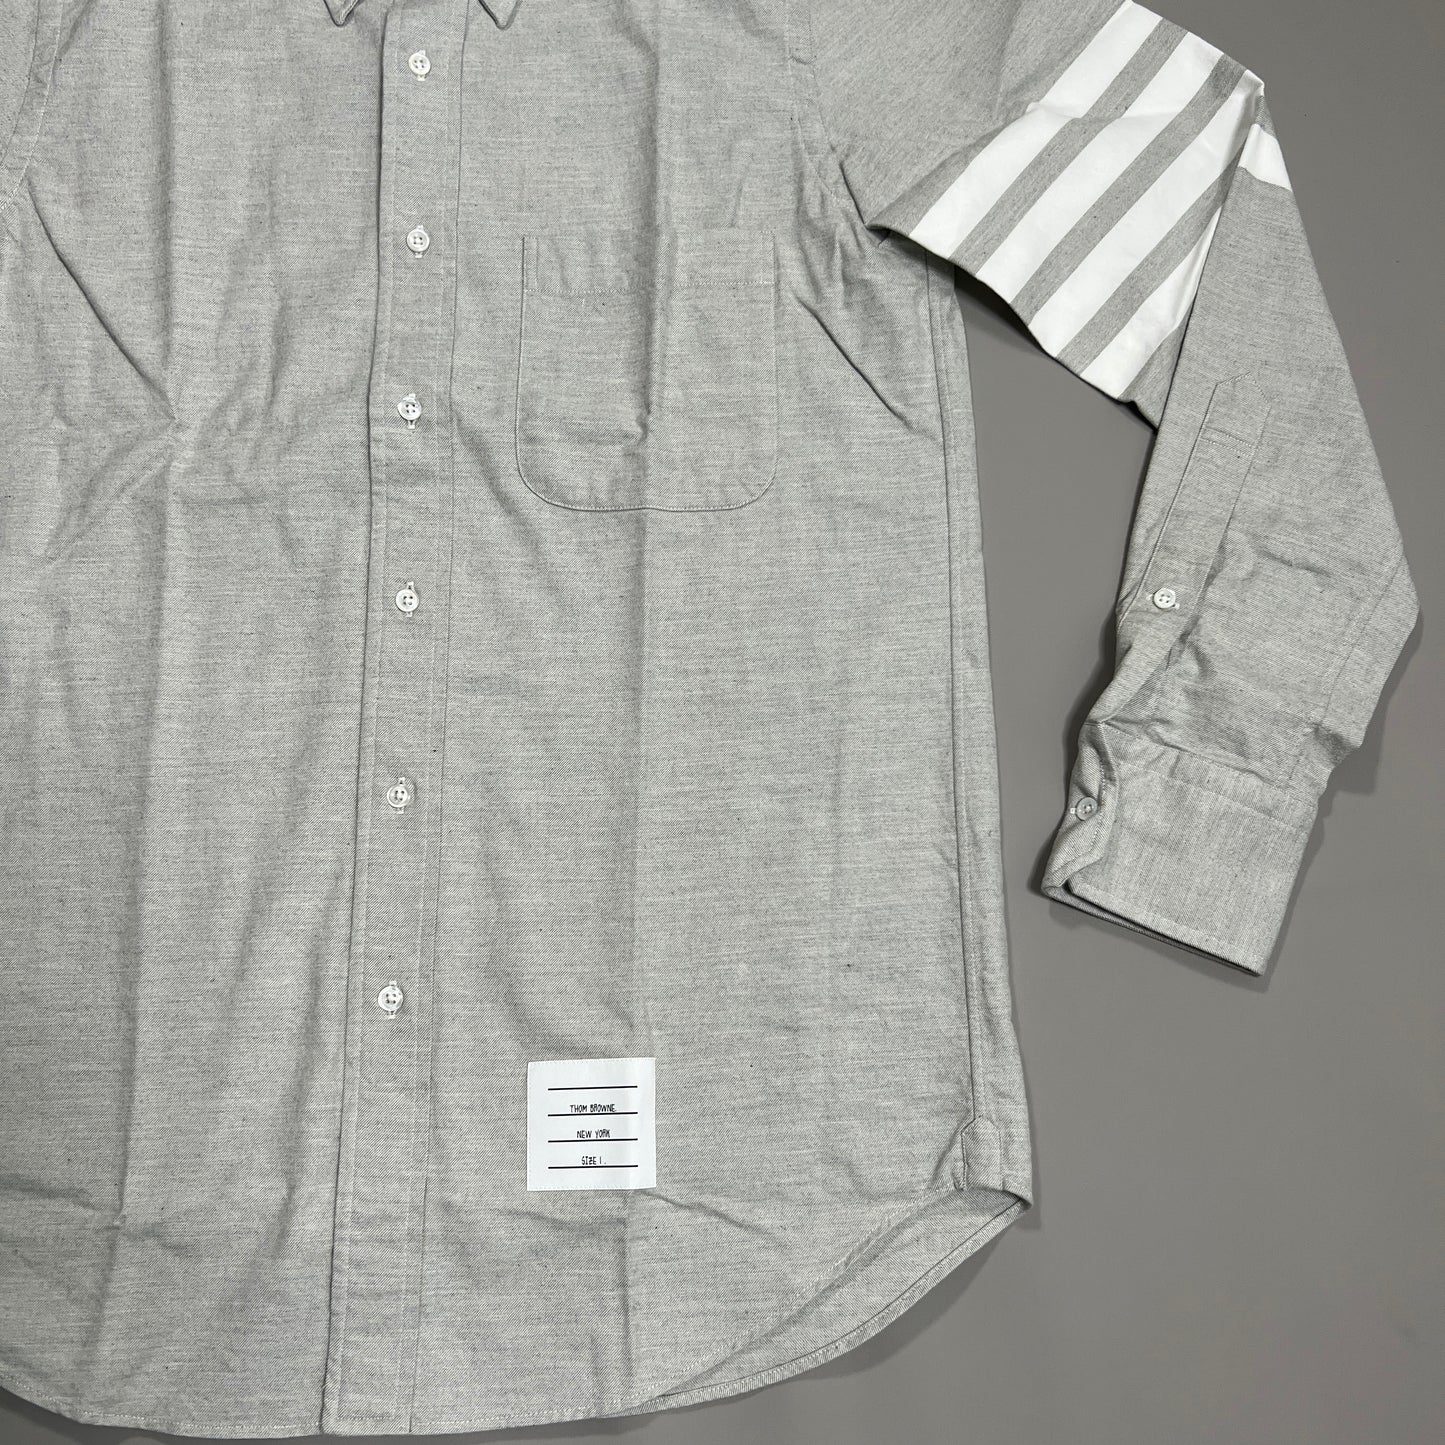 THOM BROWNE Straight Fit Button-Down Long Sleeve w/CB RWB Flannel shirt w/woven 4 Bar Sleeve in Med Grey Size 1 (NEW)